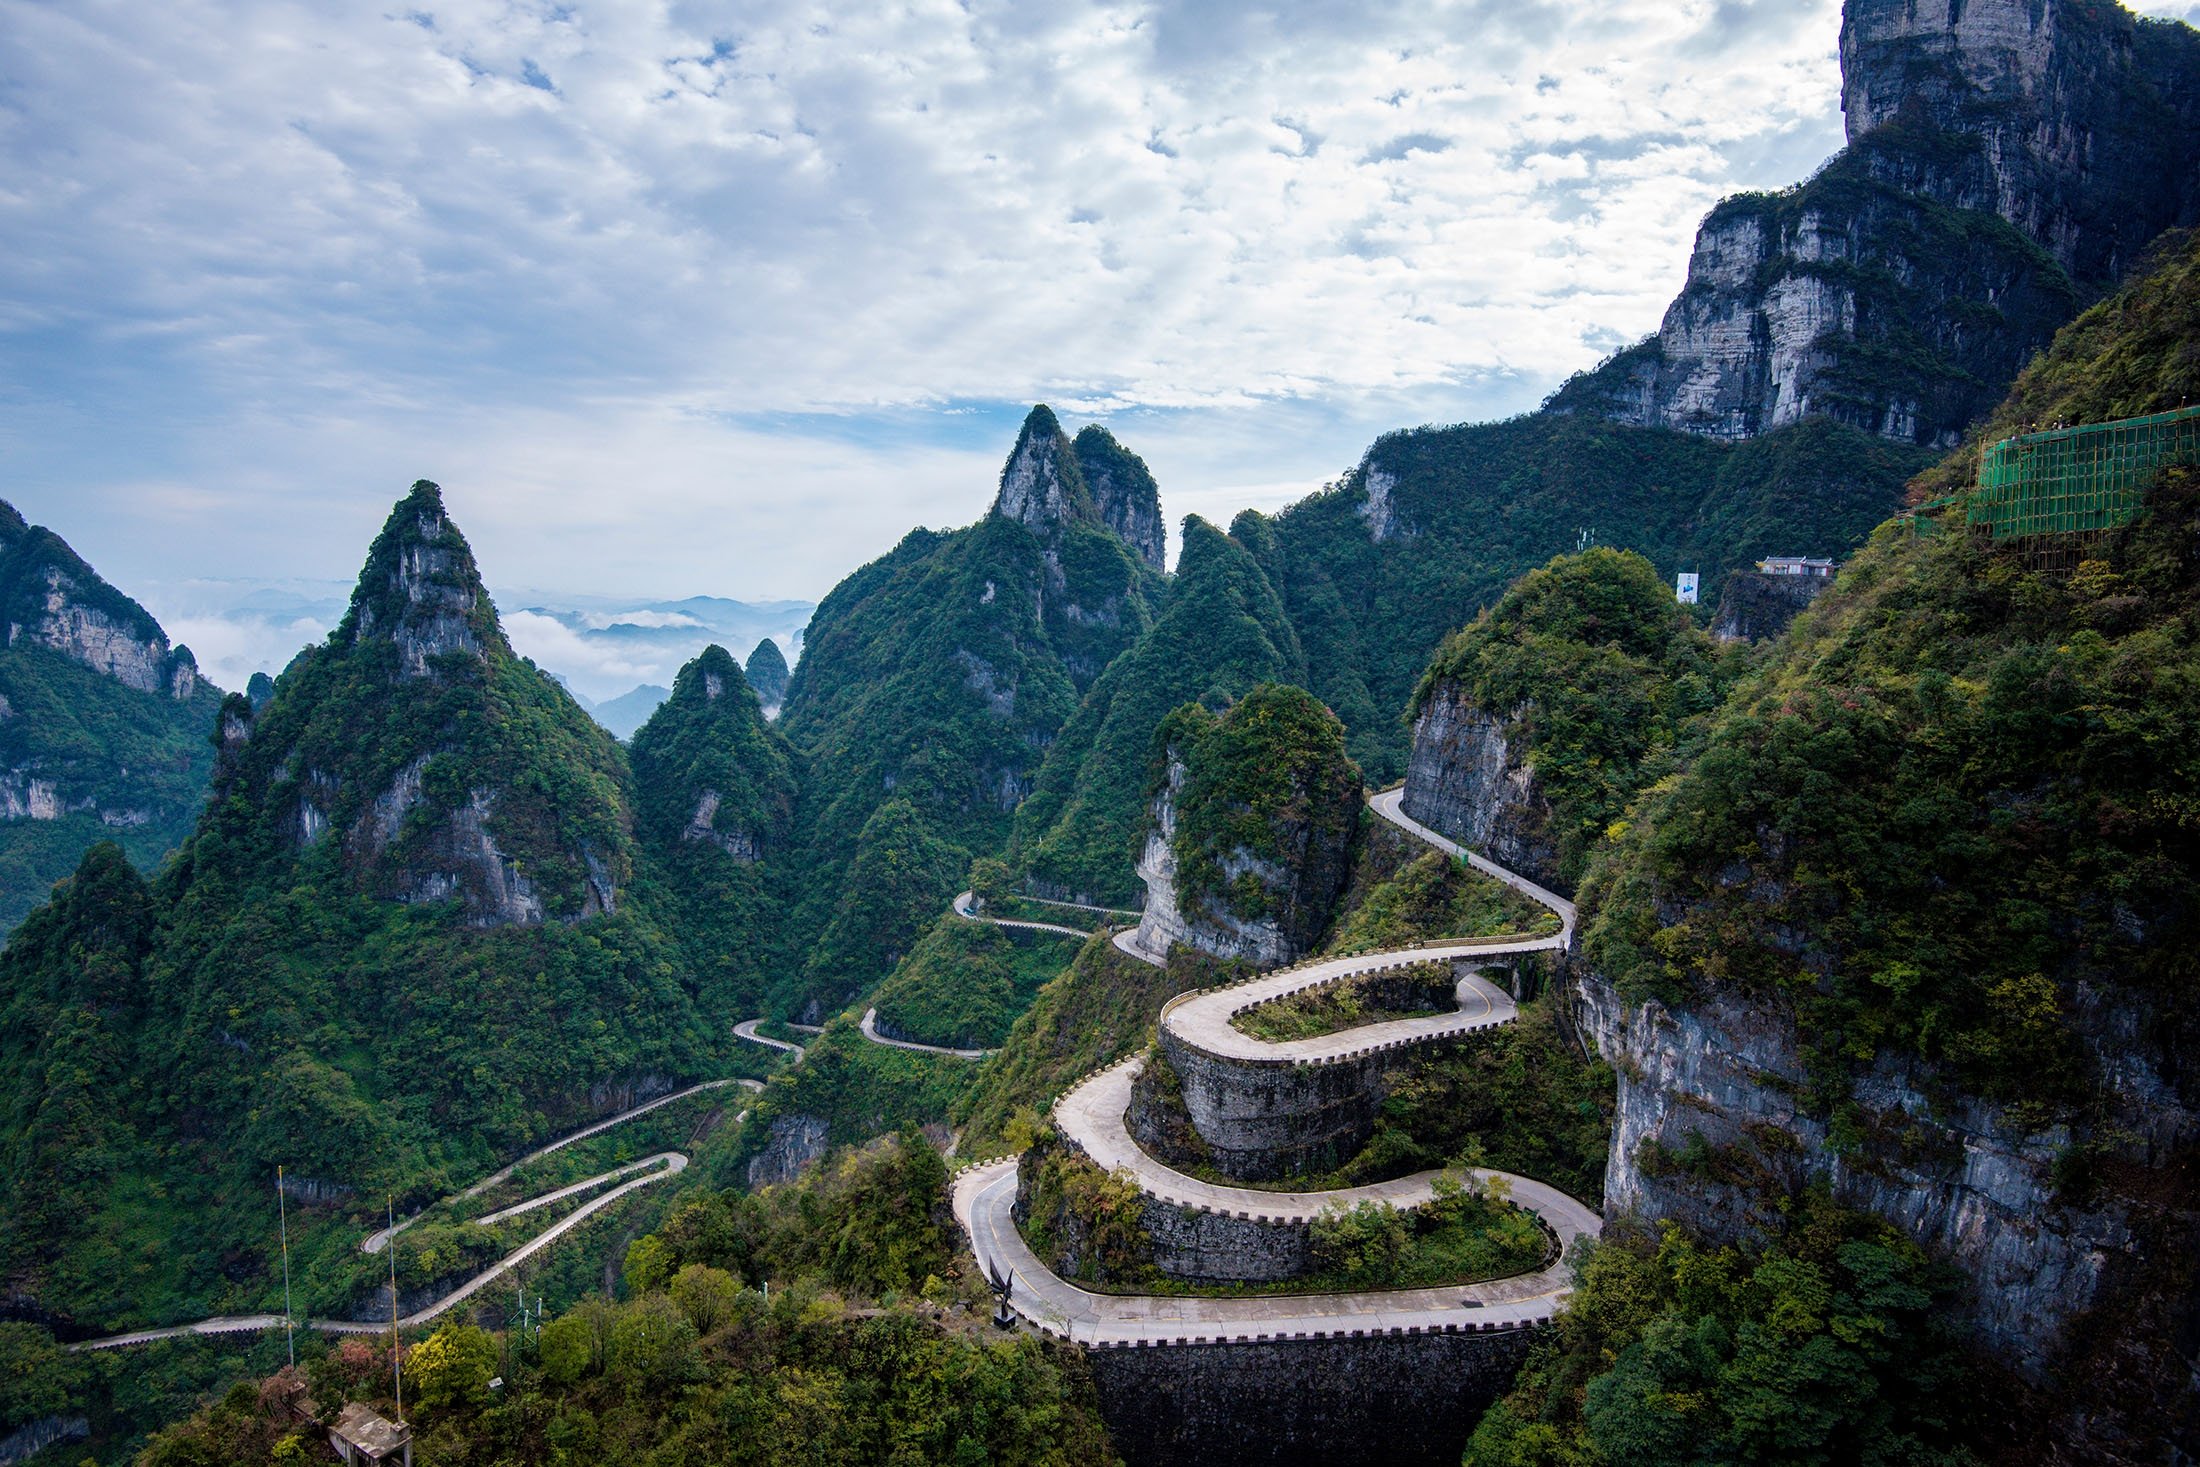 Tianmen Mountain, meaning Heaven's Gate, is a beautiful spot in Zhangjiajie, in the northwestern part of Hunan Province, China with 99 winding roads and 999 steps of stairs. (Shutterstock Photo)